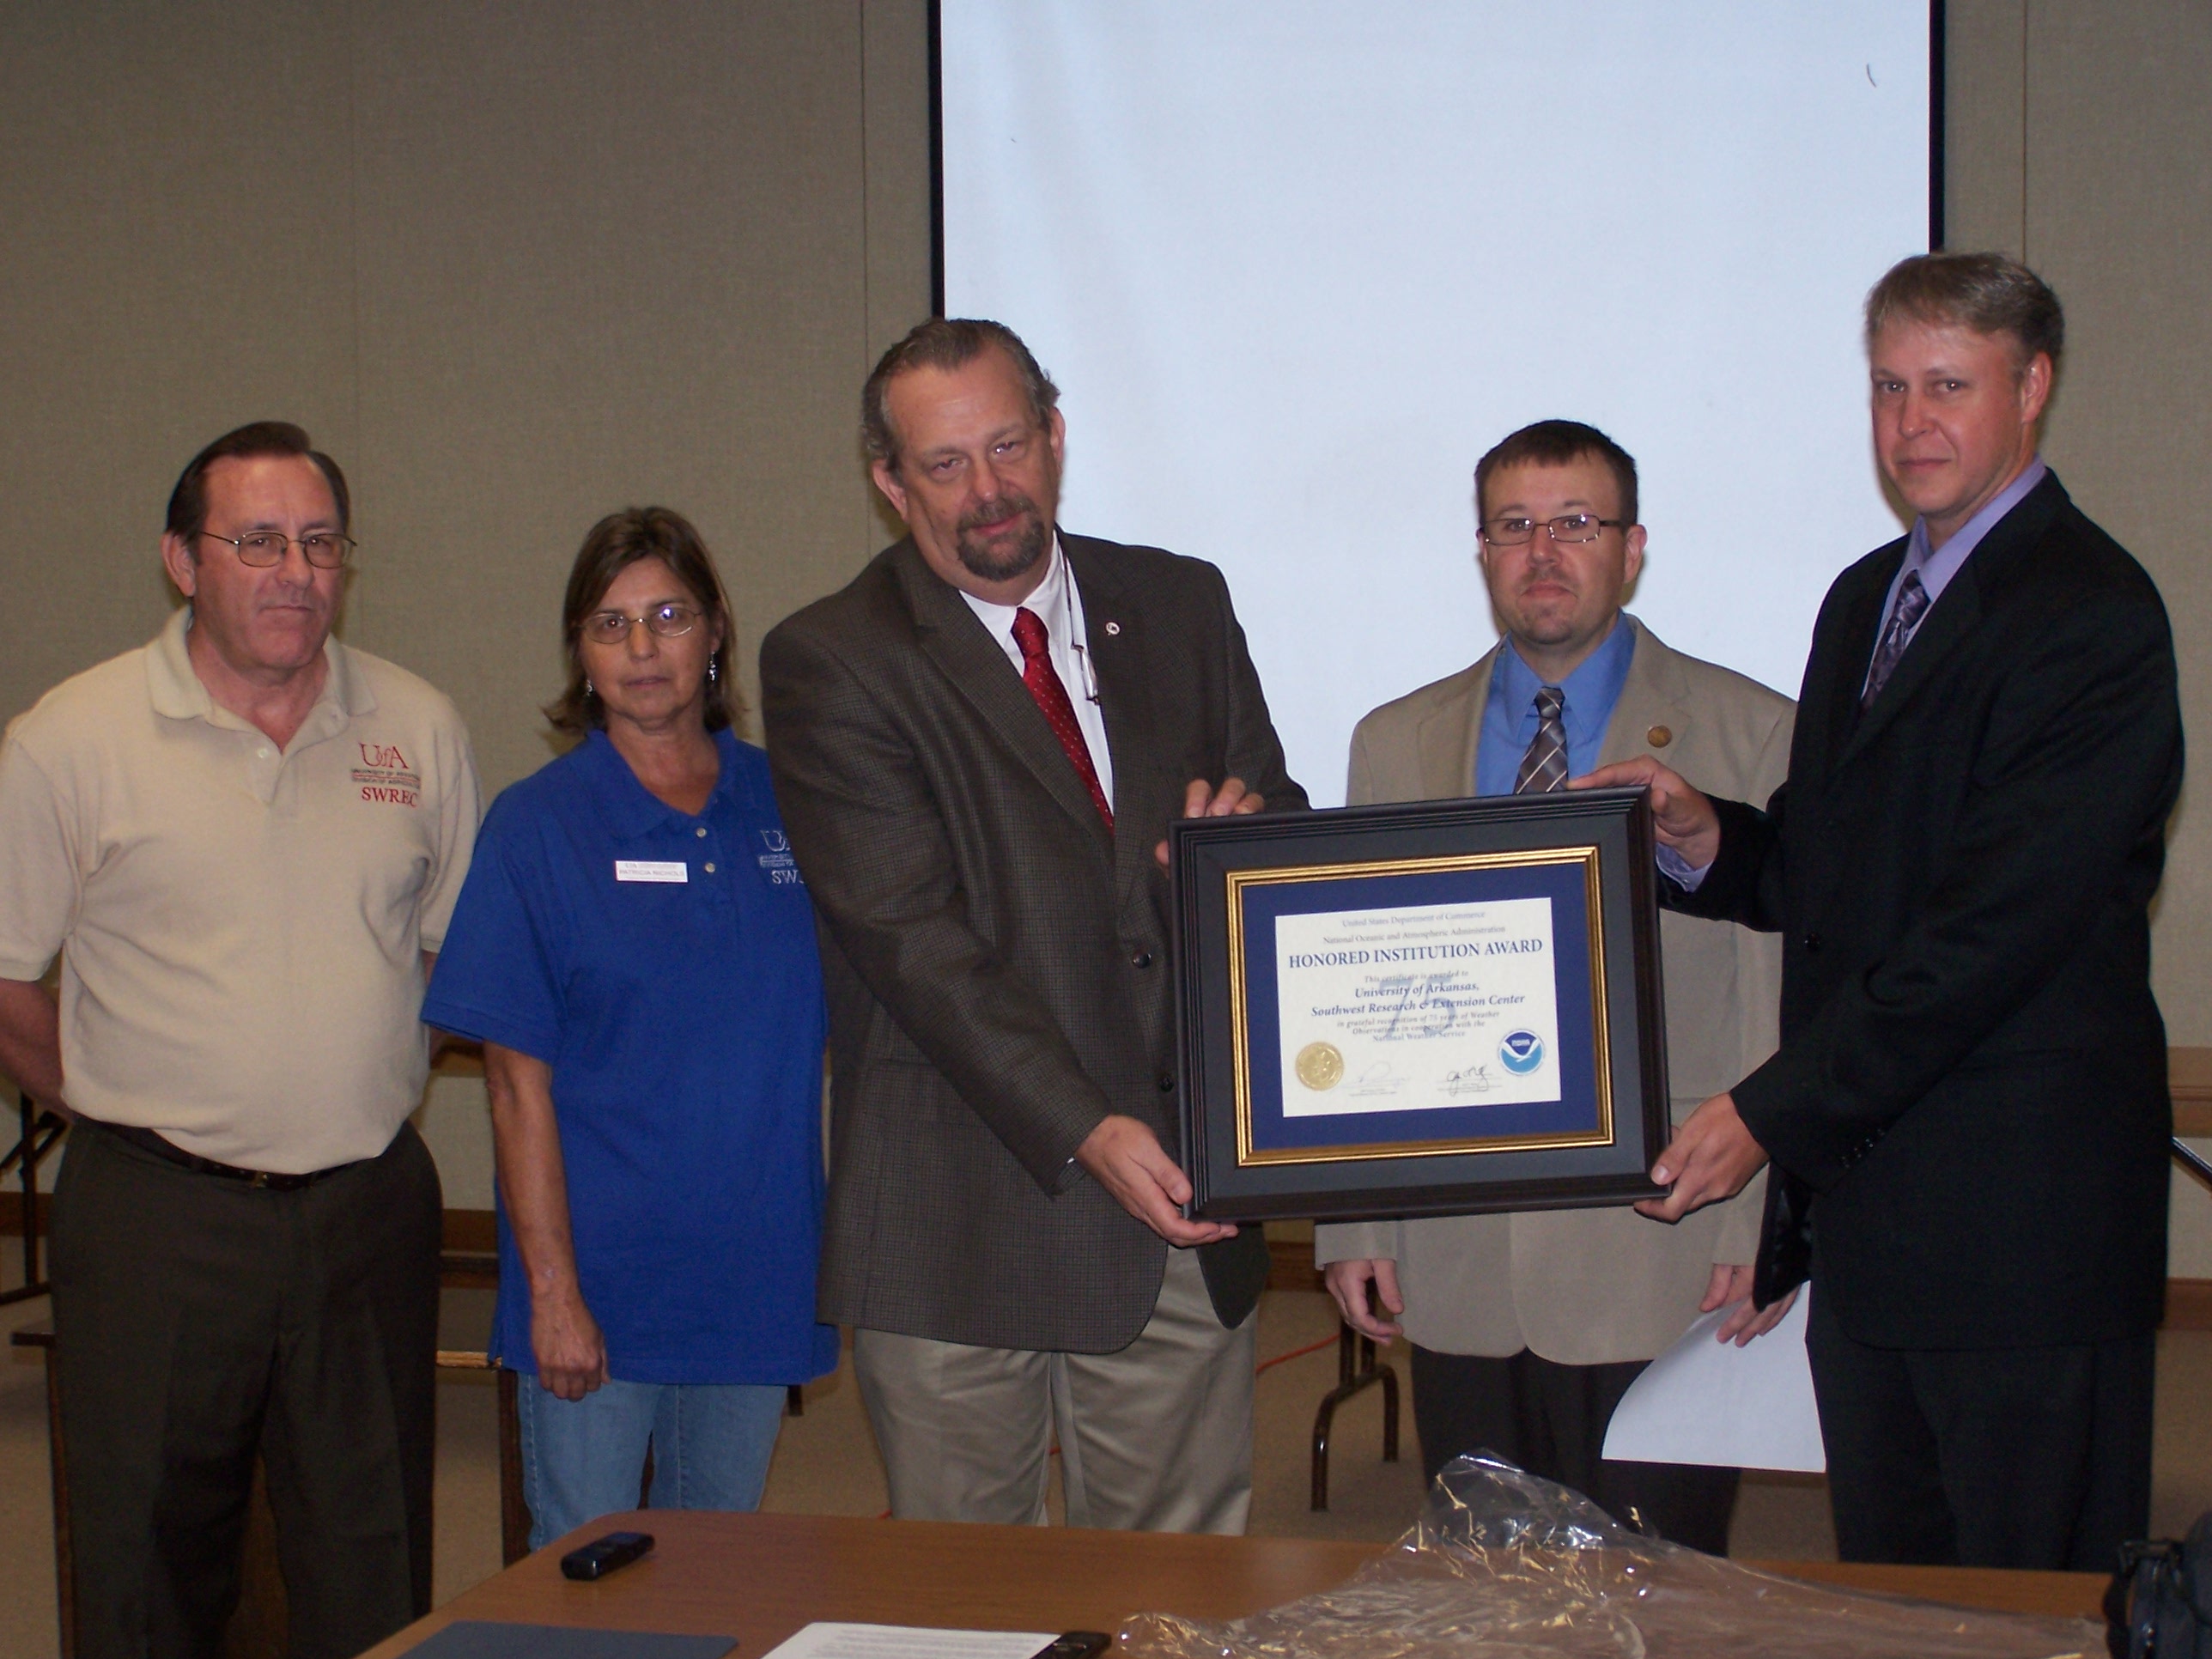 The University of Arkansas, Southwest Research and Extension Center in Hope, AR, received the 75-Year Honored Institution Award in 2011